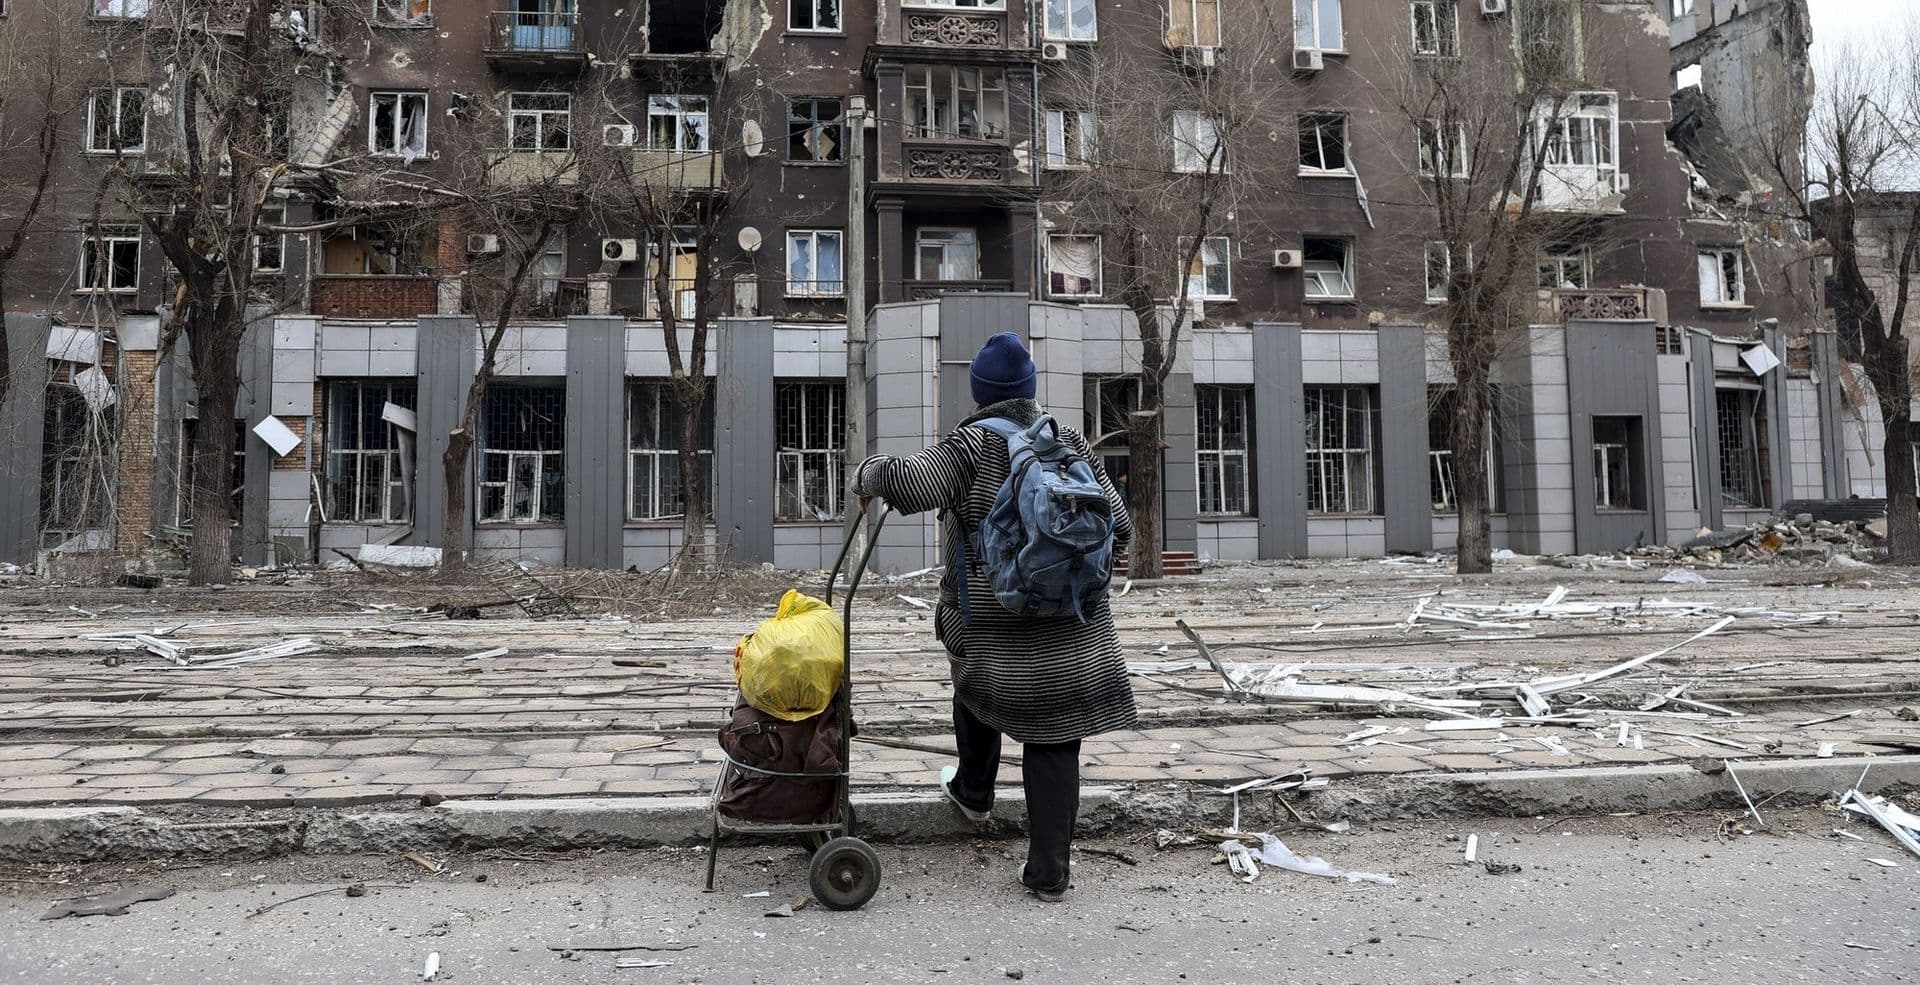 Mariupol has been the site of some of the heaviest shelling in the war